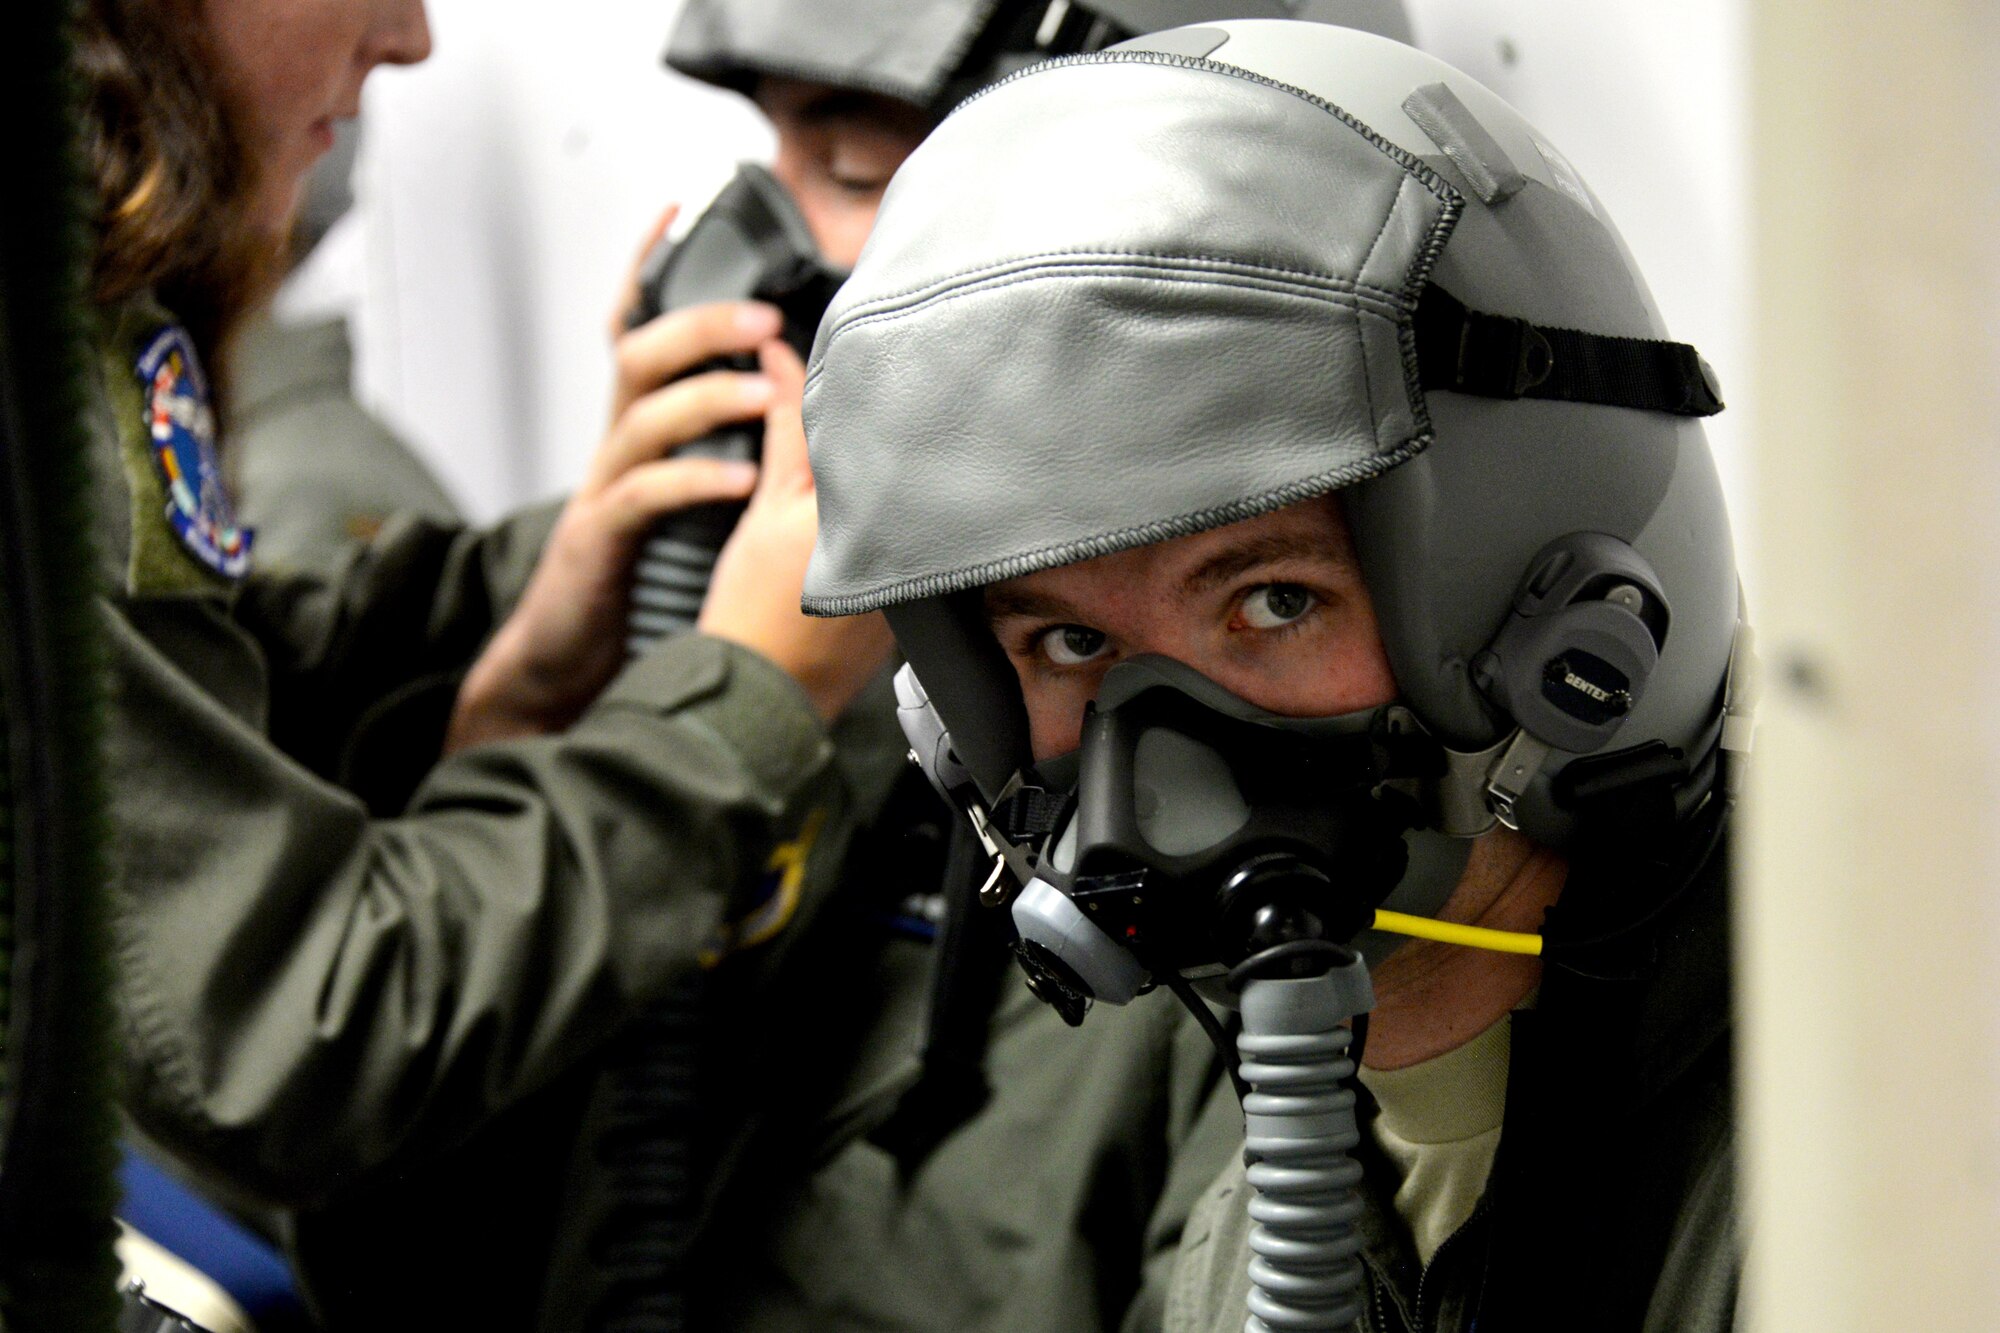 2nd Lt. Luke Piper, a Pilot Training Next 2.0 student, waits to be instructed during a hypobaric chamber flight at Sheppard Air Force Base, Texas, Jan. 28, 2019. Focus areas in the second iteration of PTN include innovation, scaling learning rapidly and collecting, analyzing and using big-data to help drive decision-making. (U.S. Air Force photo by Airman 1st Class Madeleine E. Remillard)